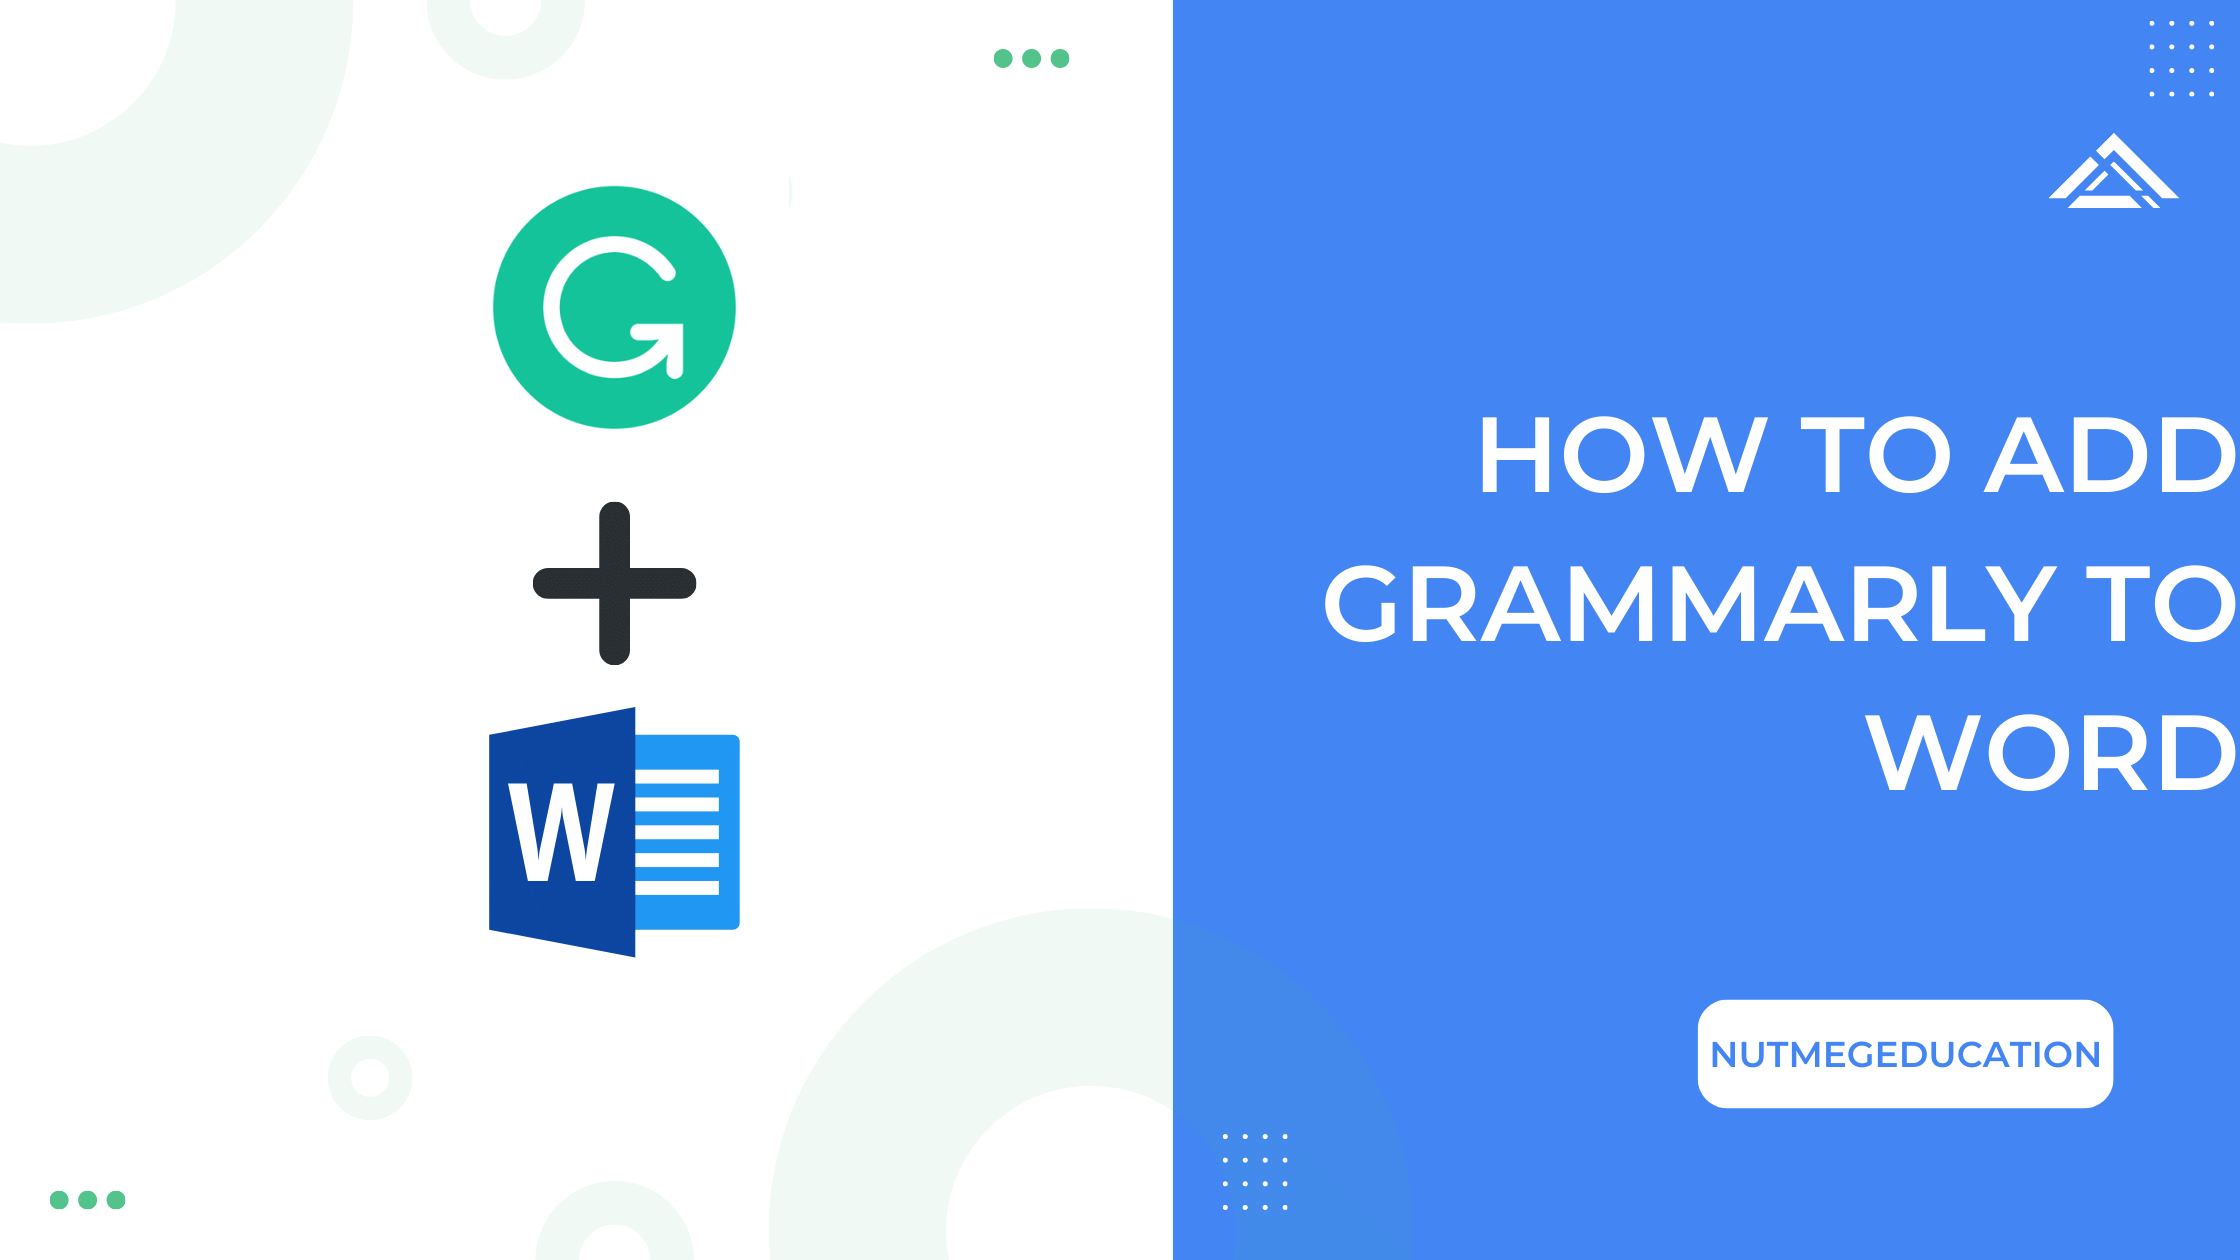 How To Add Grammarly To Word - NutMegEducation